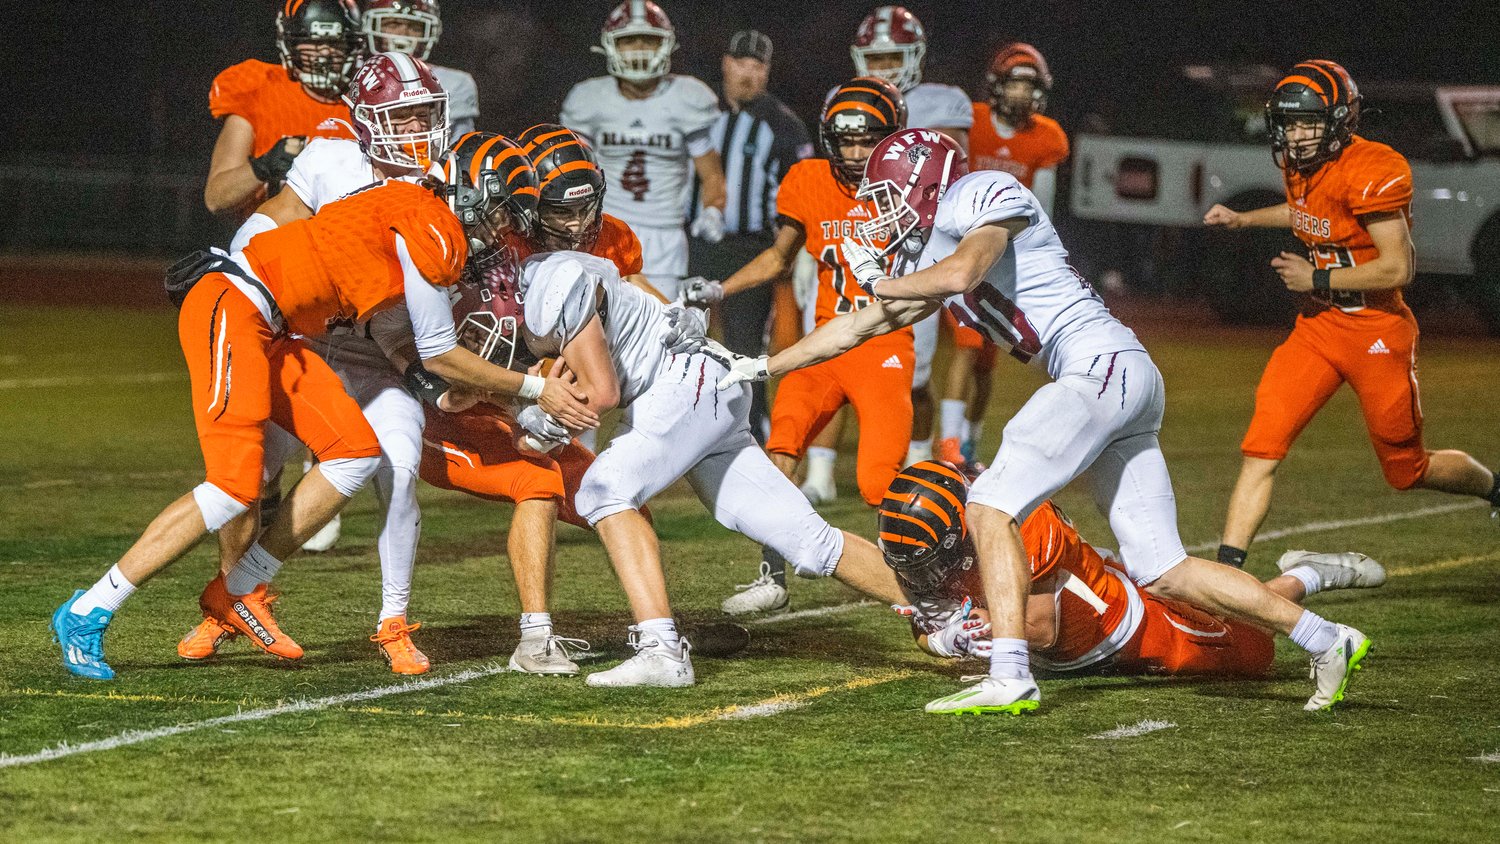 W.F. West sophomore Tucker Land (7) lowers his shoulder and crosses the goal line for a touchdown in the Bearcats' 55-7 win over Centralia in the Swamp Cup on Oct. 28, 2022.